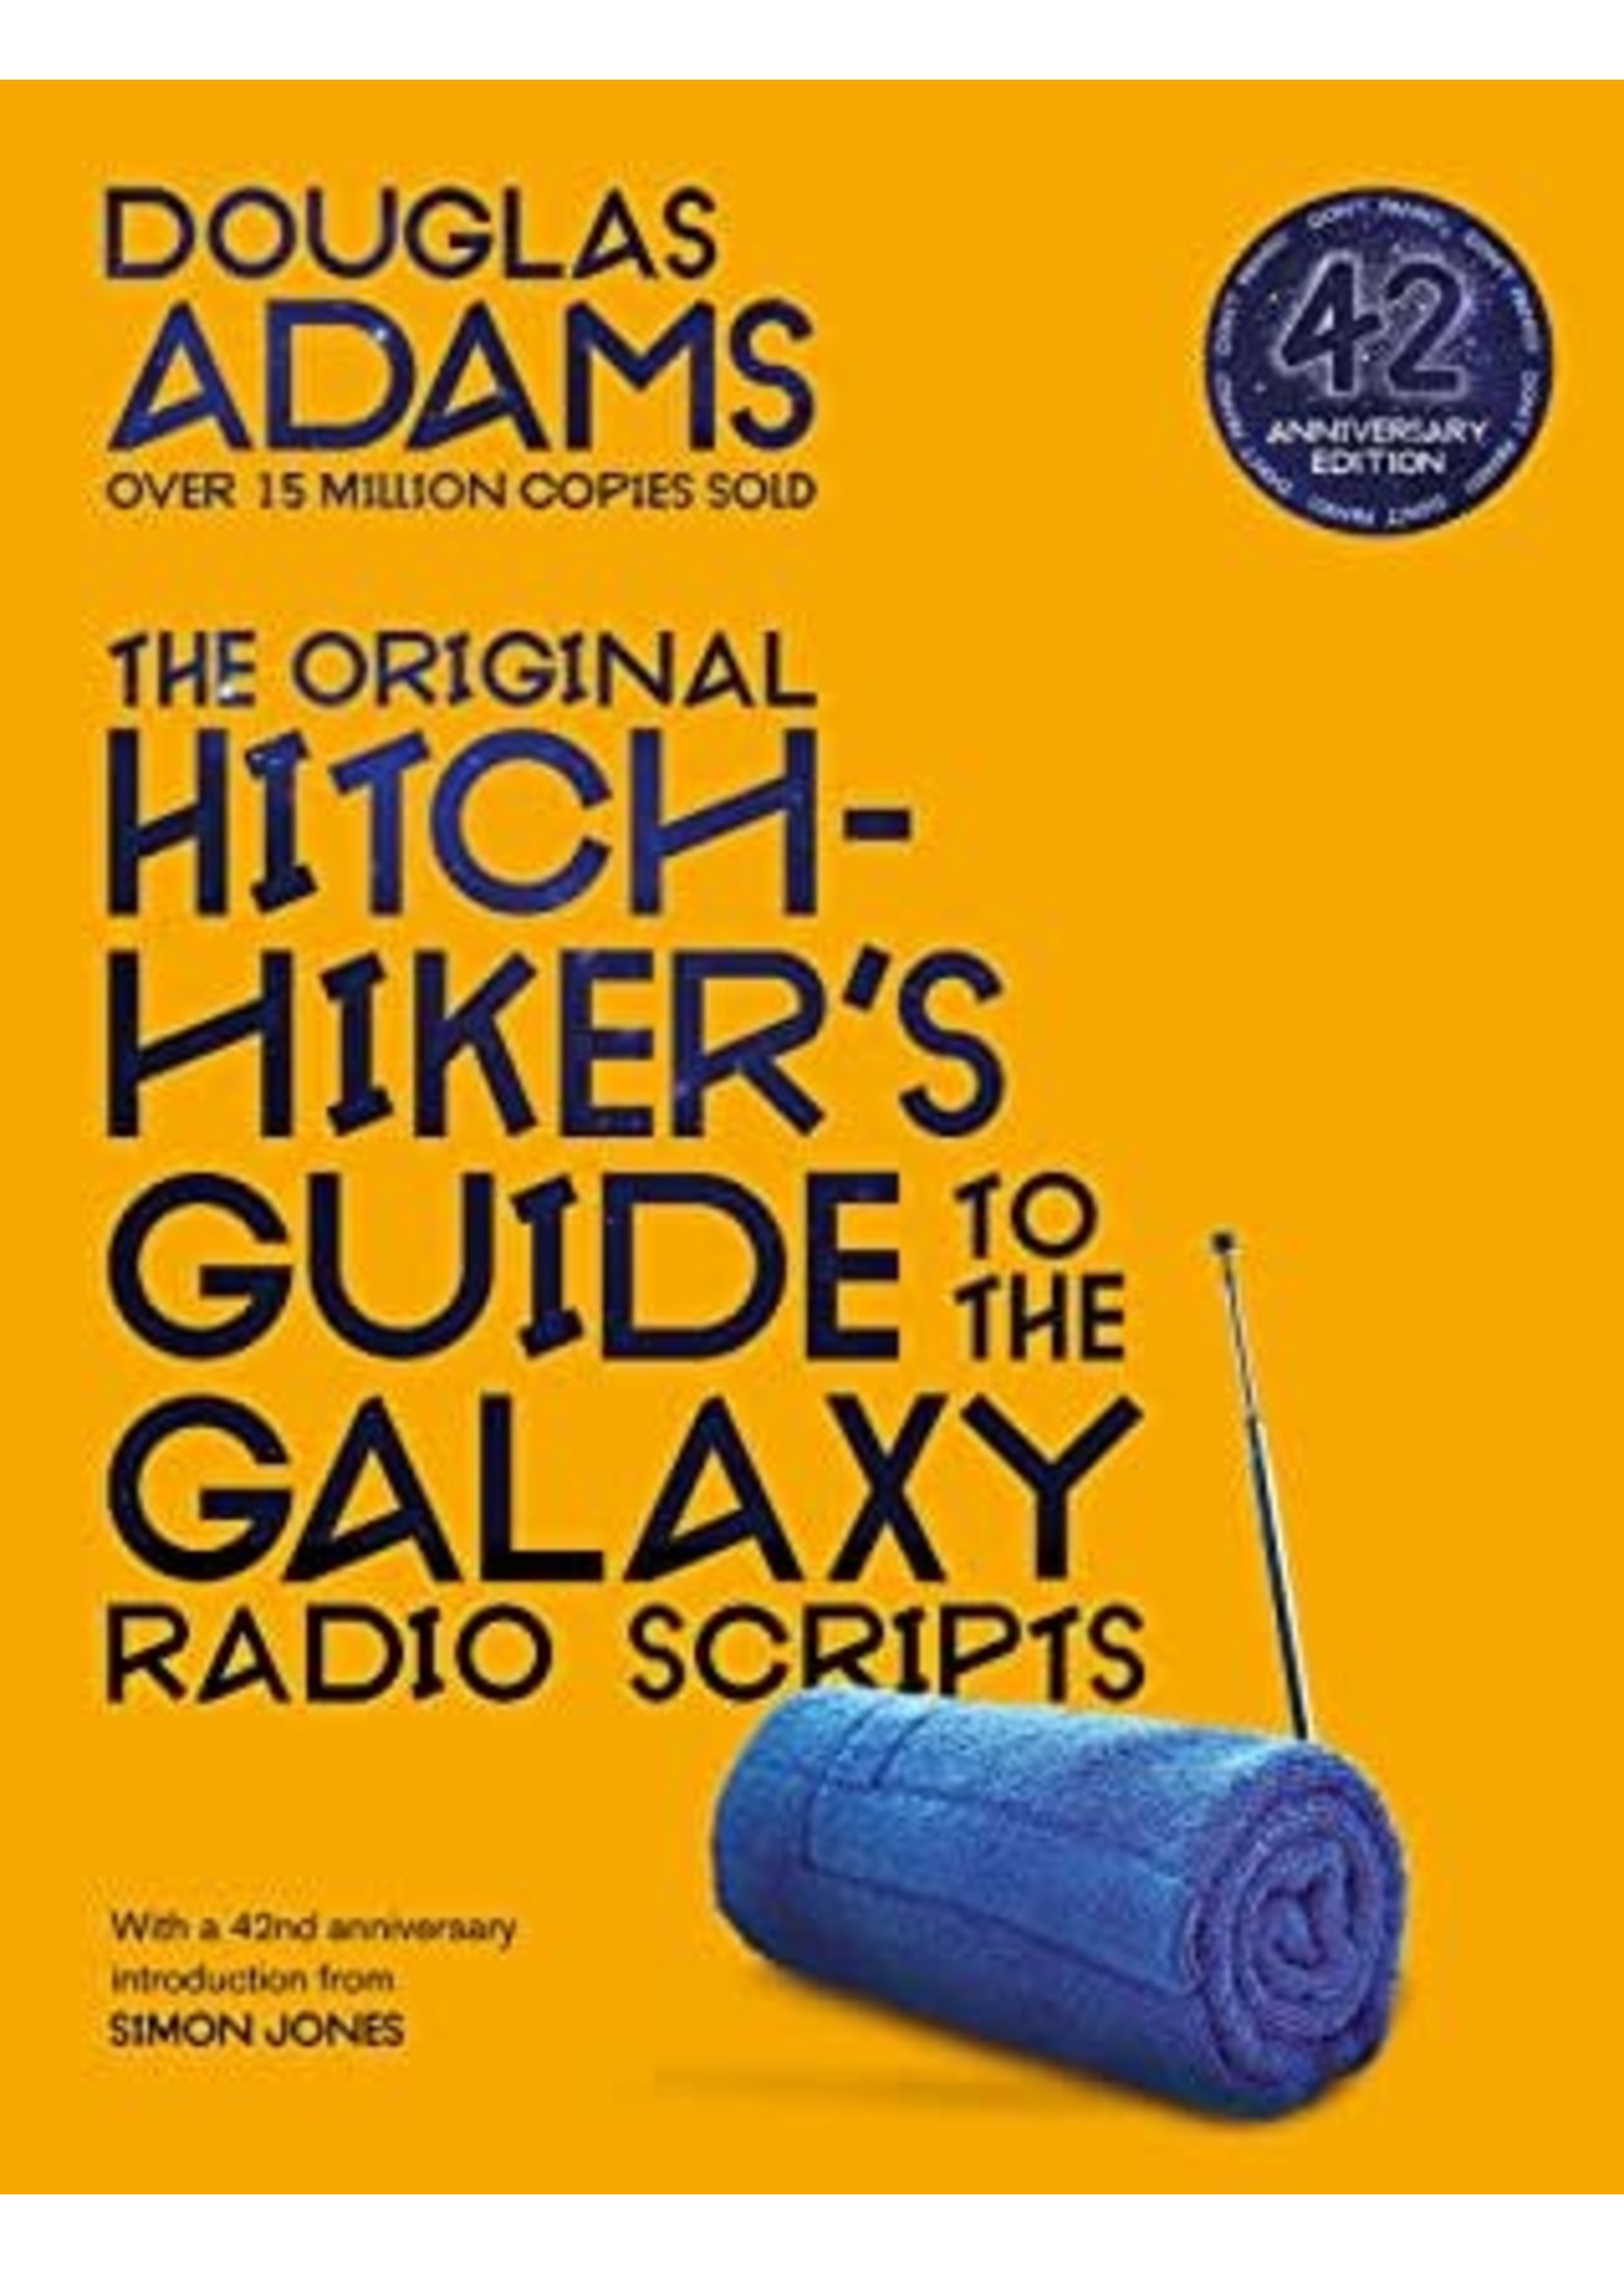 The Hitchhiker's Guide to the Galaxy: The Original Radio Scripts by Douglas Adams